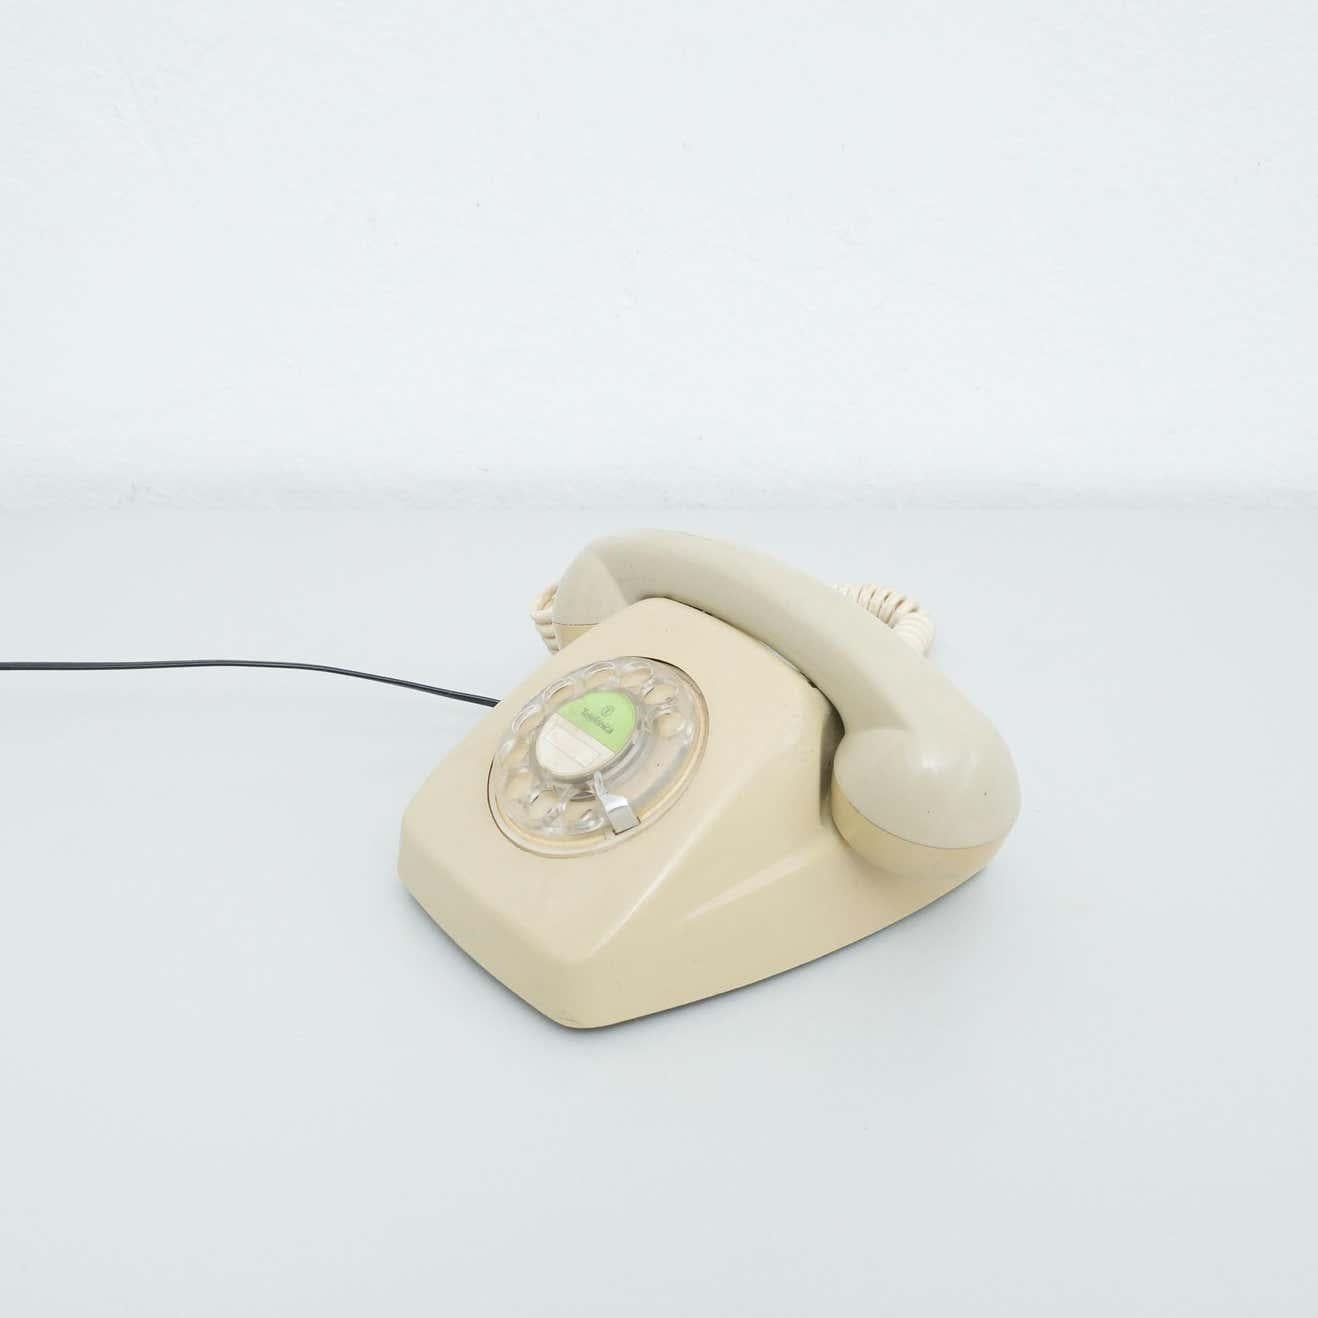 Vintage Spanish Analog Telephone by Telefonica, circa 1980 In Good Condition For Sale In Barcelona, Barcelona